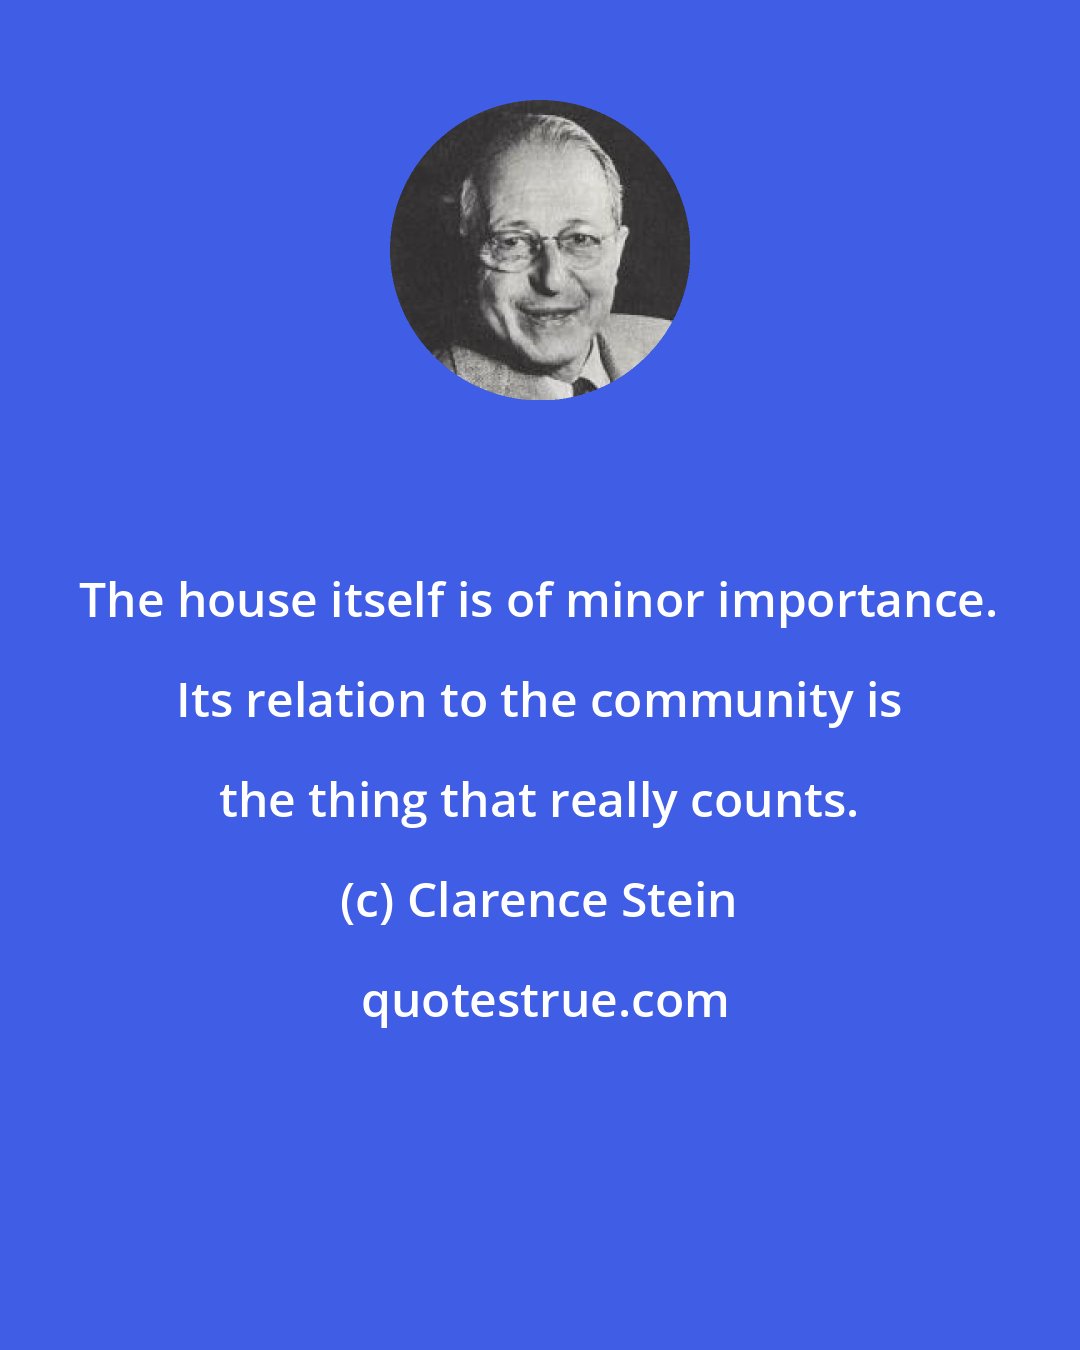 Clarence Stein: The house itself is of minor importance. Its relation to the community is the thing that really counts.